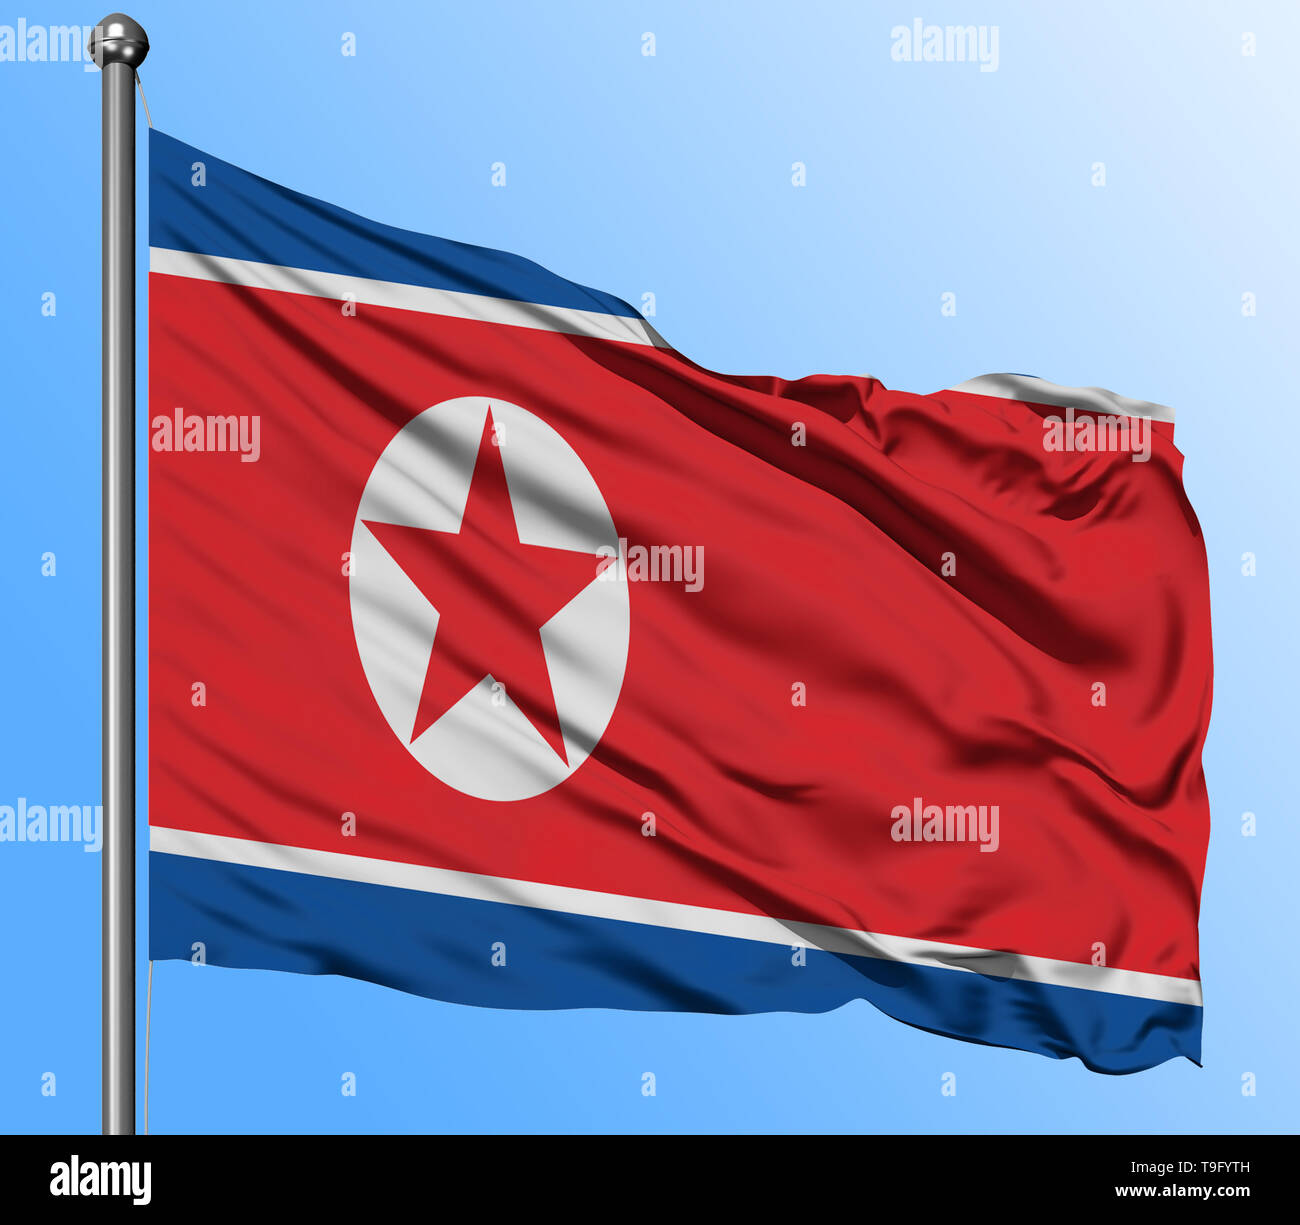 North Korea flag waving in the deep blue sky background. Isolated national flag. Macro view shot. Stock Photo